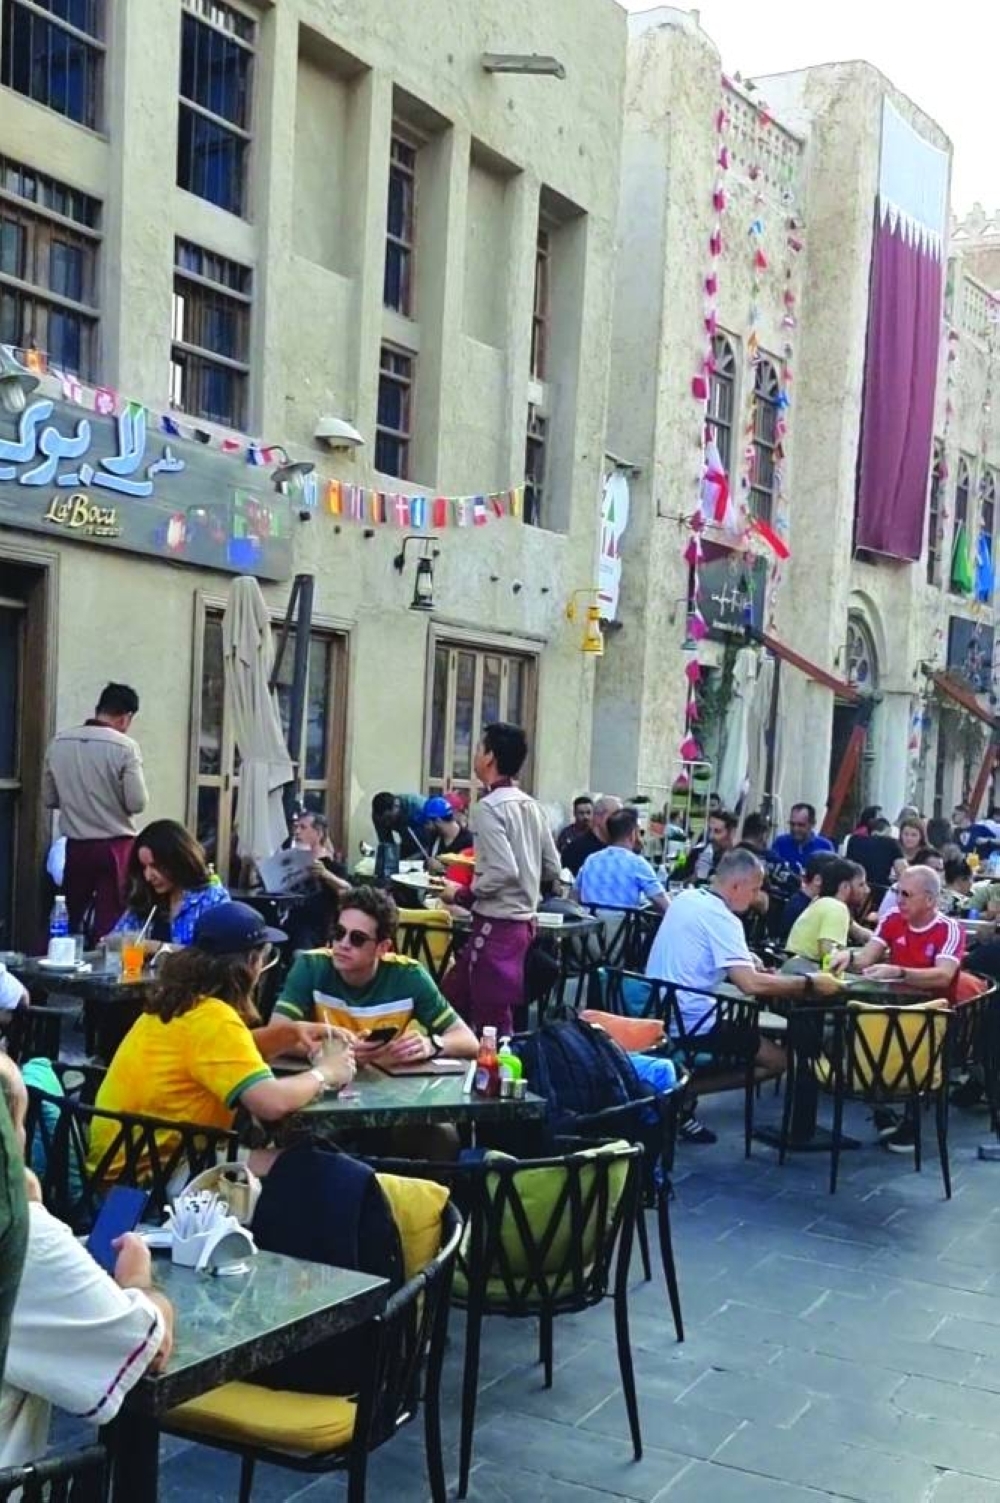 Souq Waqif continues to attract a large number of football fans.